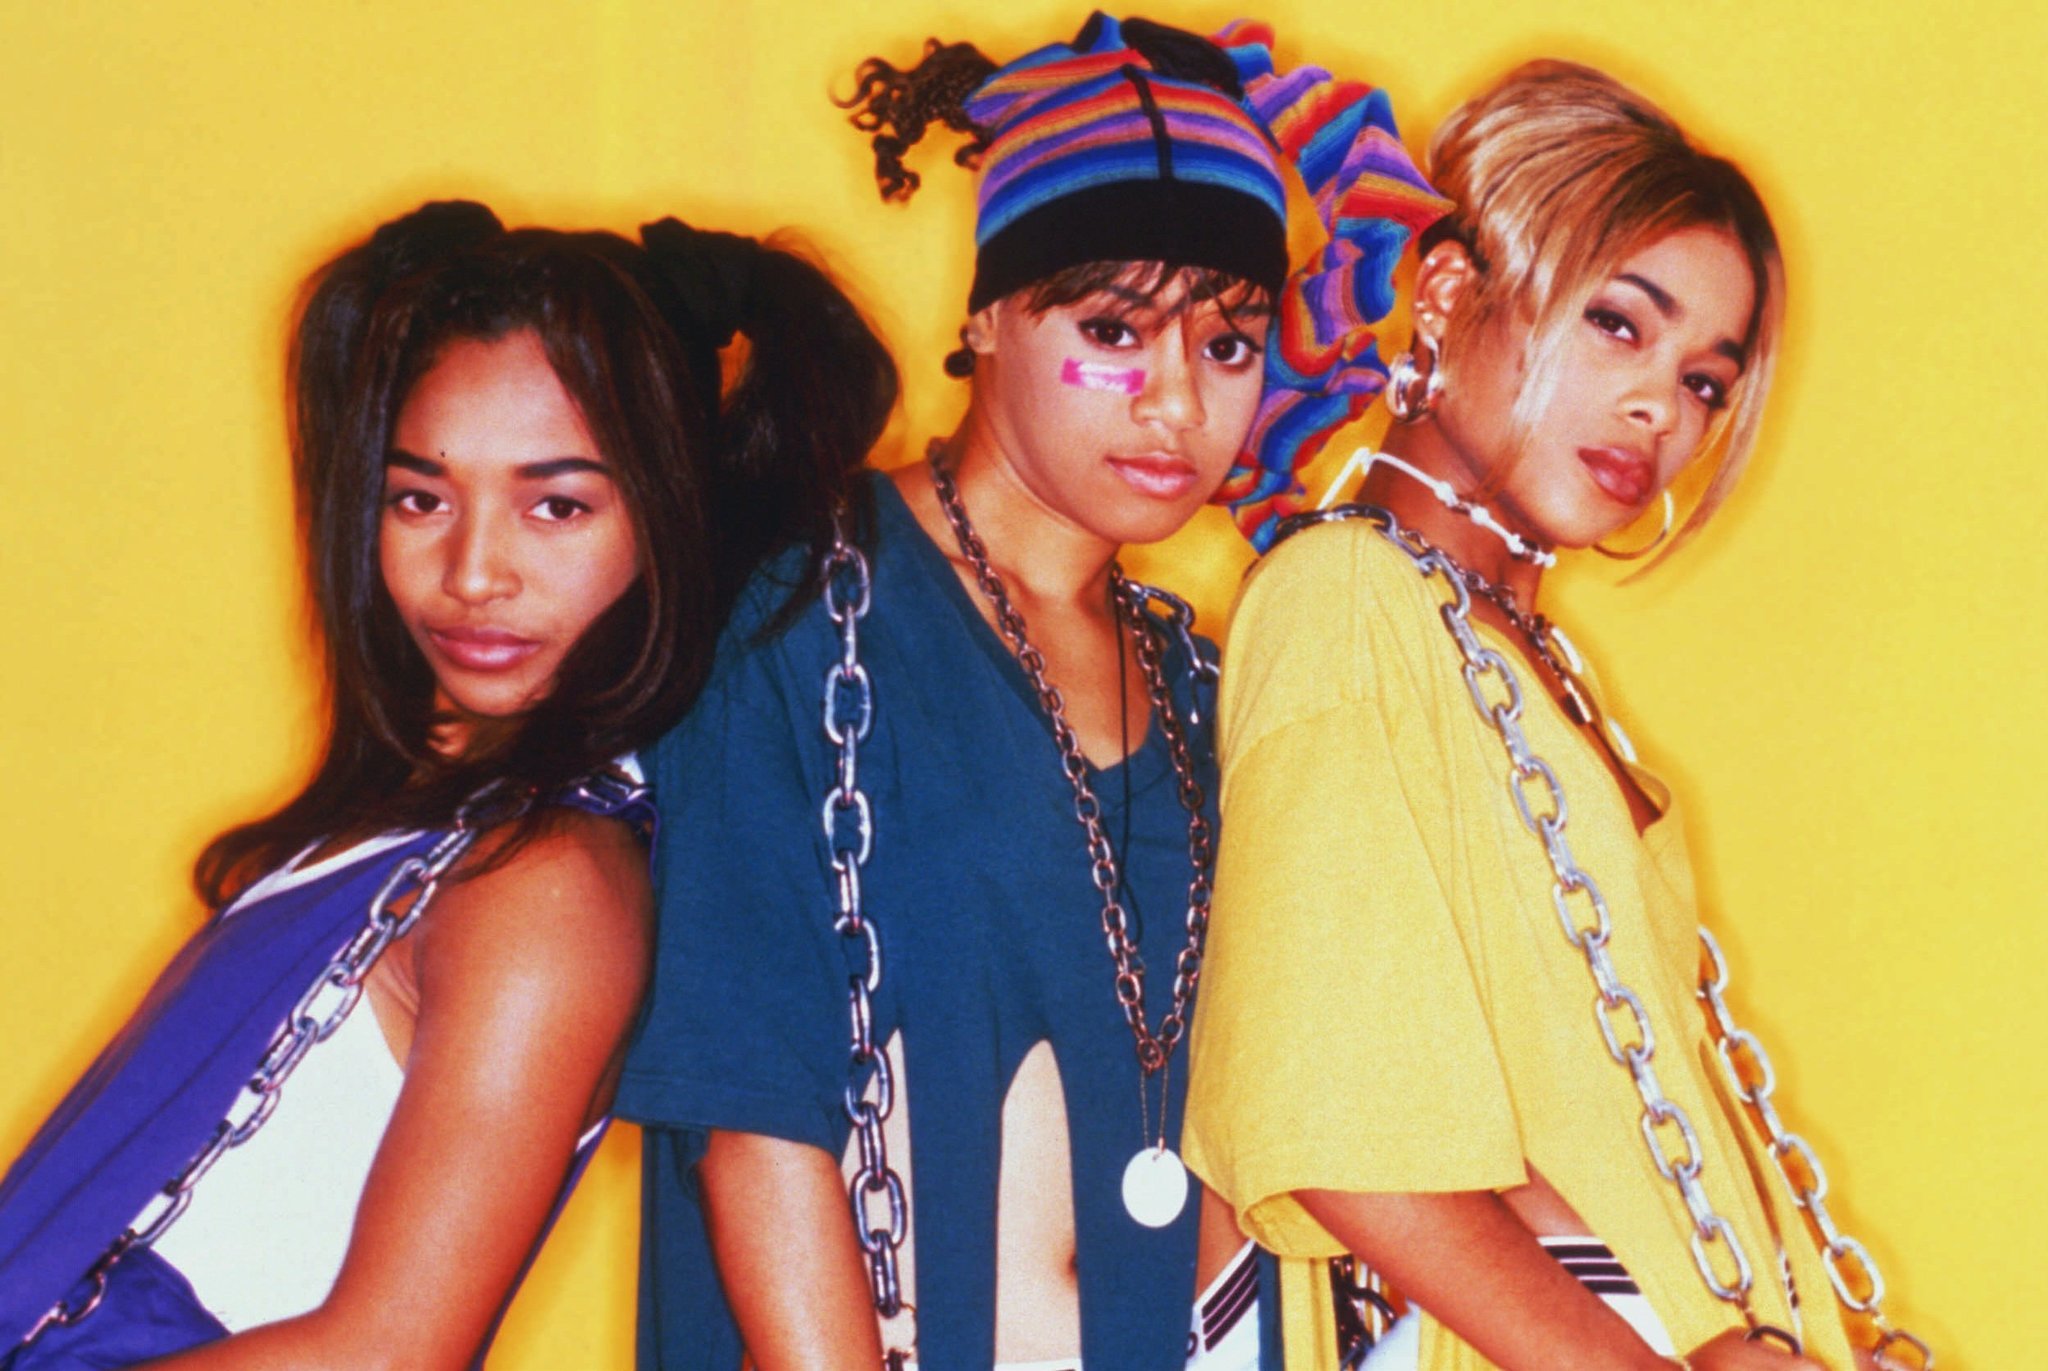 Discovered in 1991, TLC helped put Atlanta label LaFace on the map with 1992's funky 